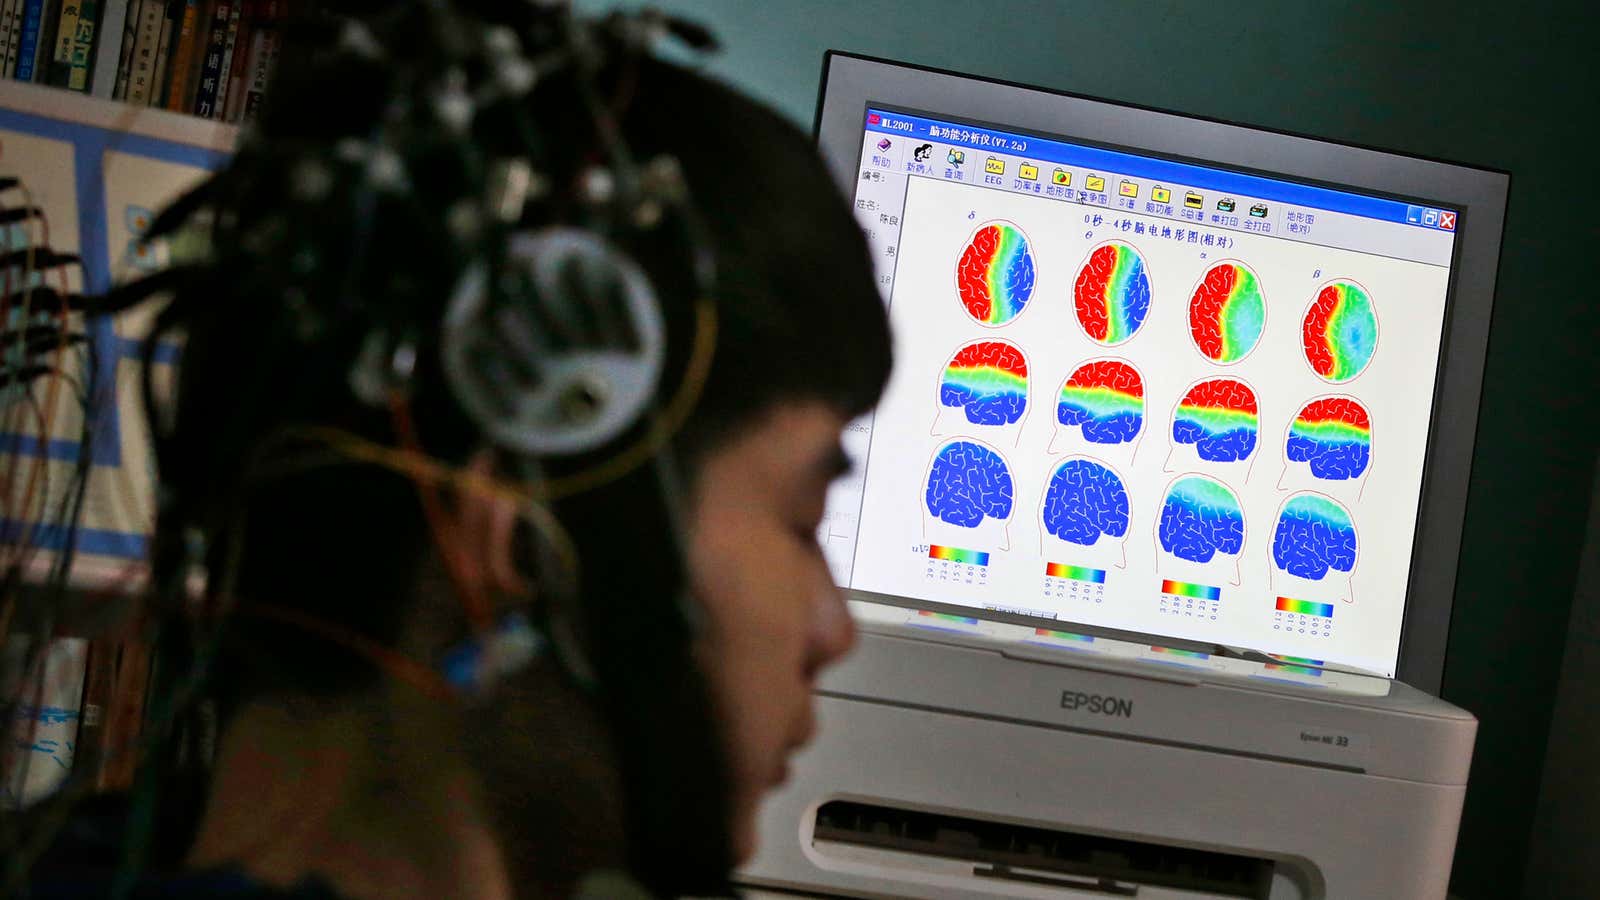 Scientists have developed a technique that can translate people’s unspoken thoughts swirling through their minds into actual speech.